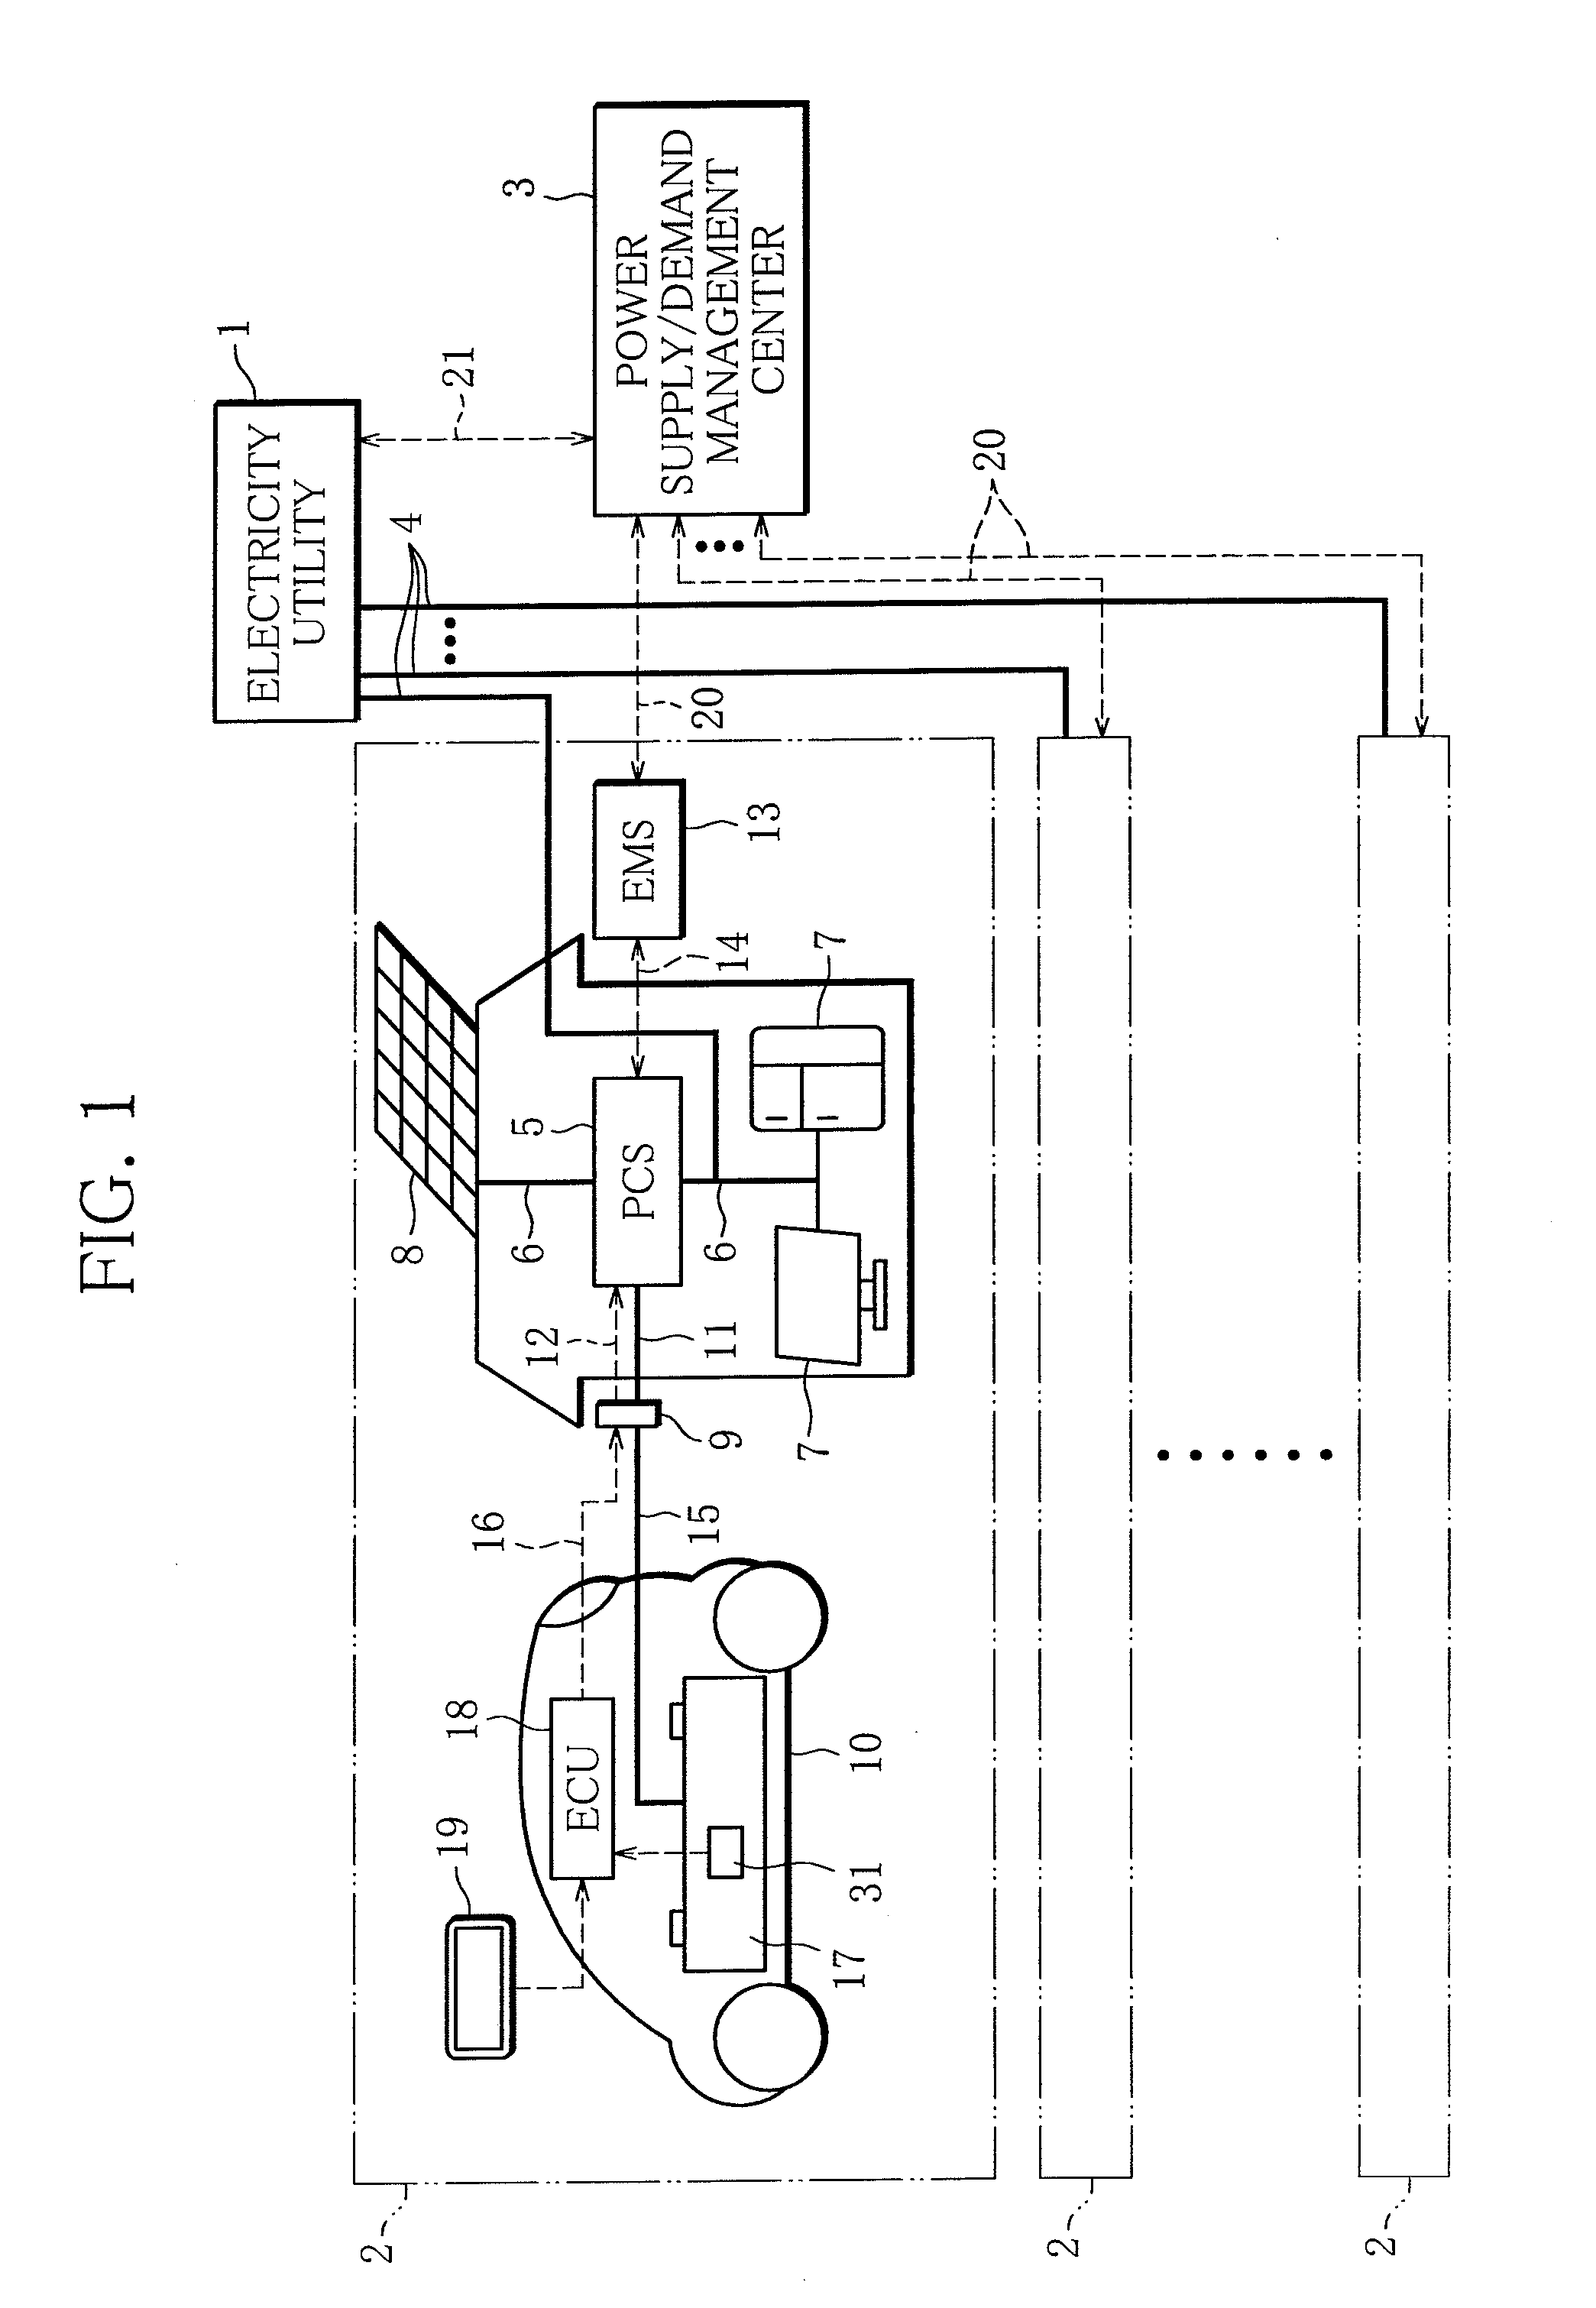 Battery information output equipment for power supply and demand leveling system